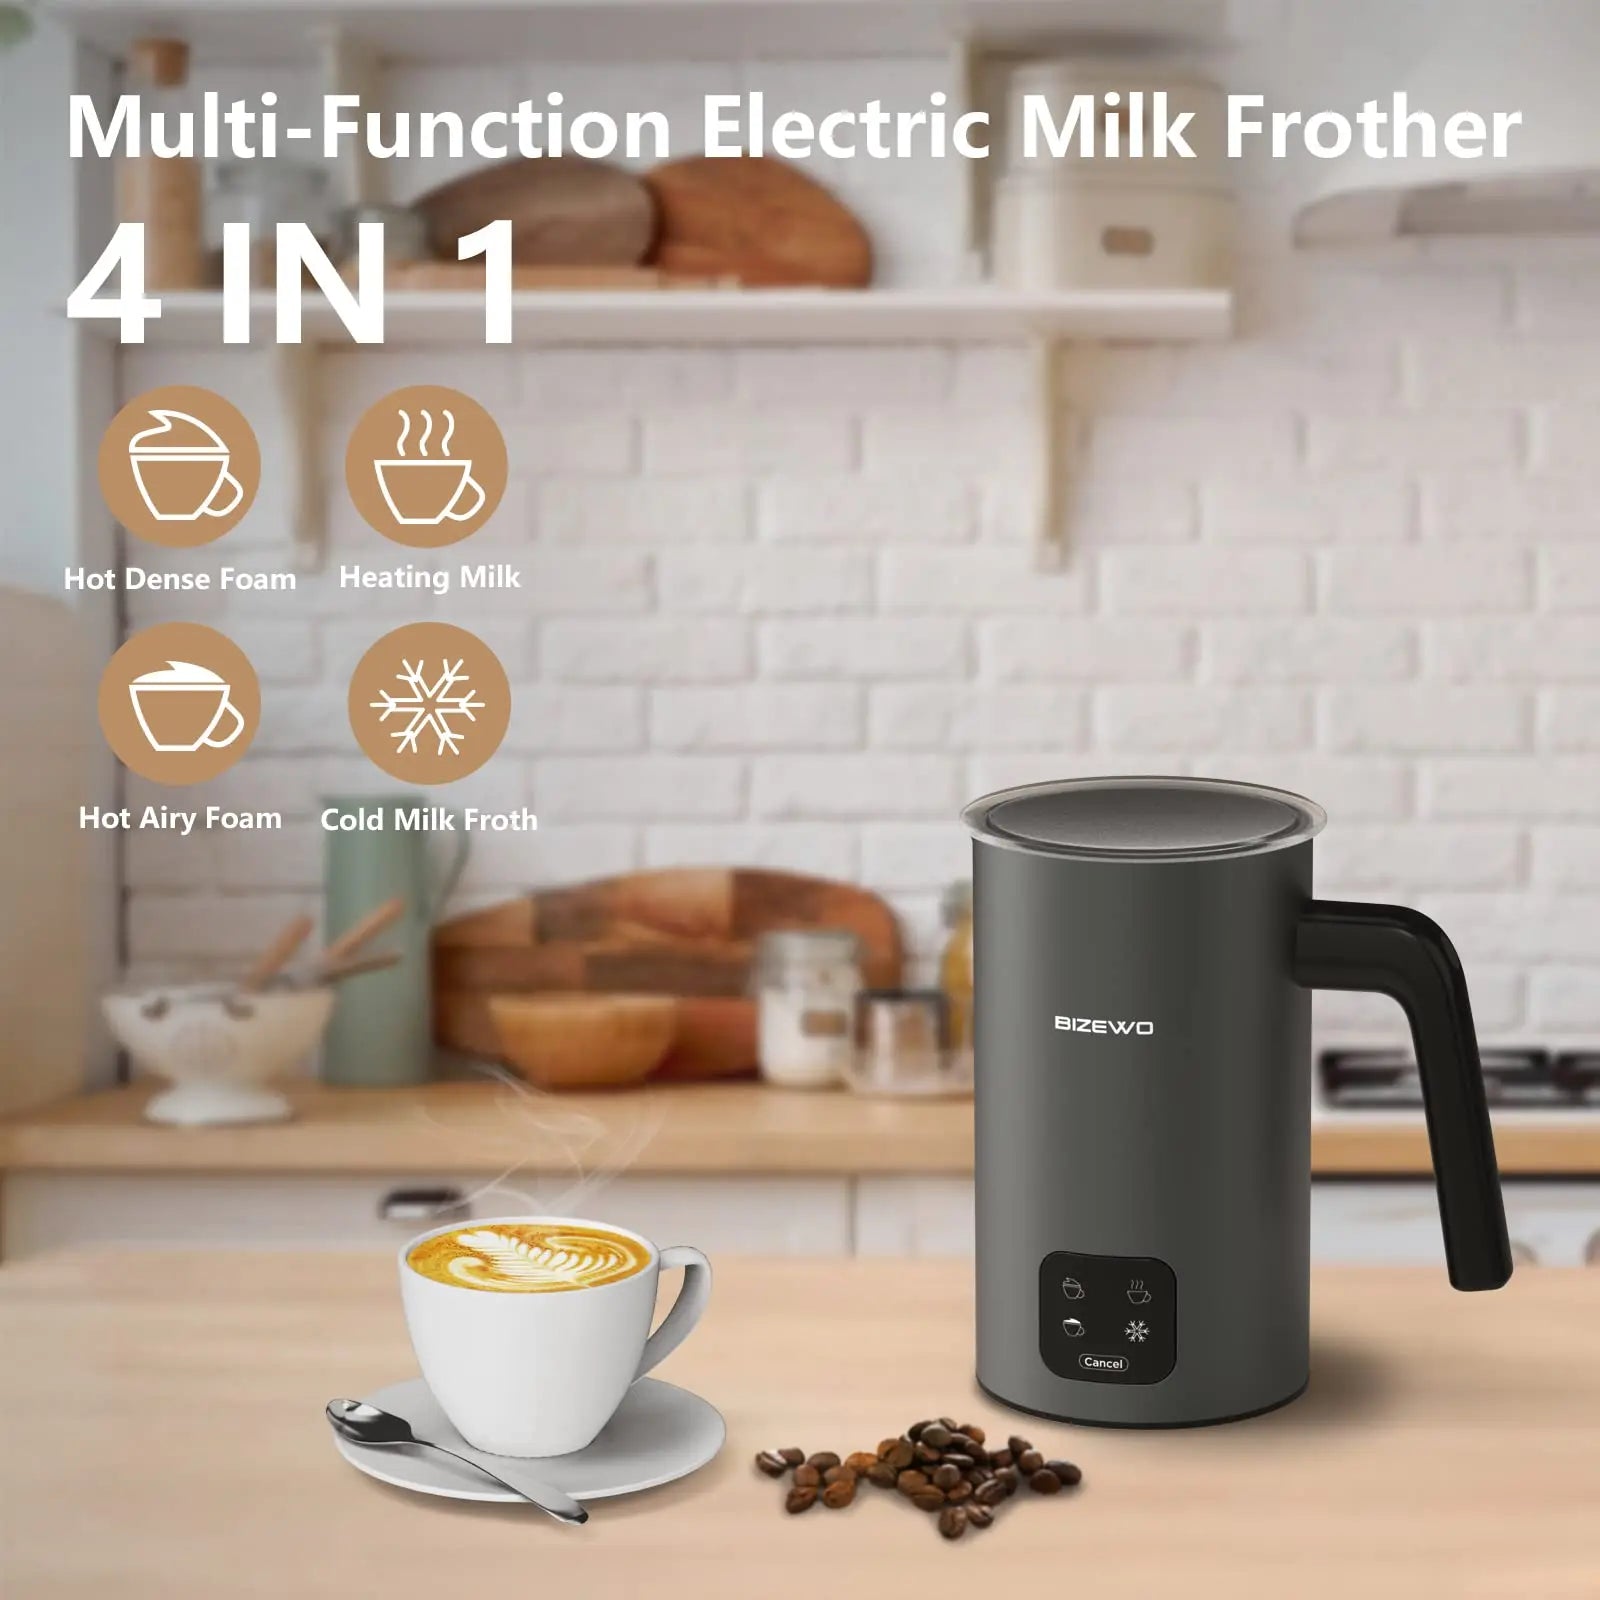 Frother for Coffee, Milk Frother, 4 IN 1 Automatic Warm and Cold Milk Foamer, BIZEWO Stainless Steel Milk Steamer for Latte, Cappuccinos, Macchiato, Hot Chocolate Milk with LED Touch Screen Panel BIZEWO